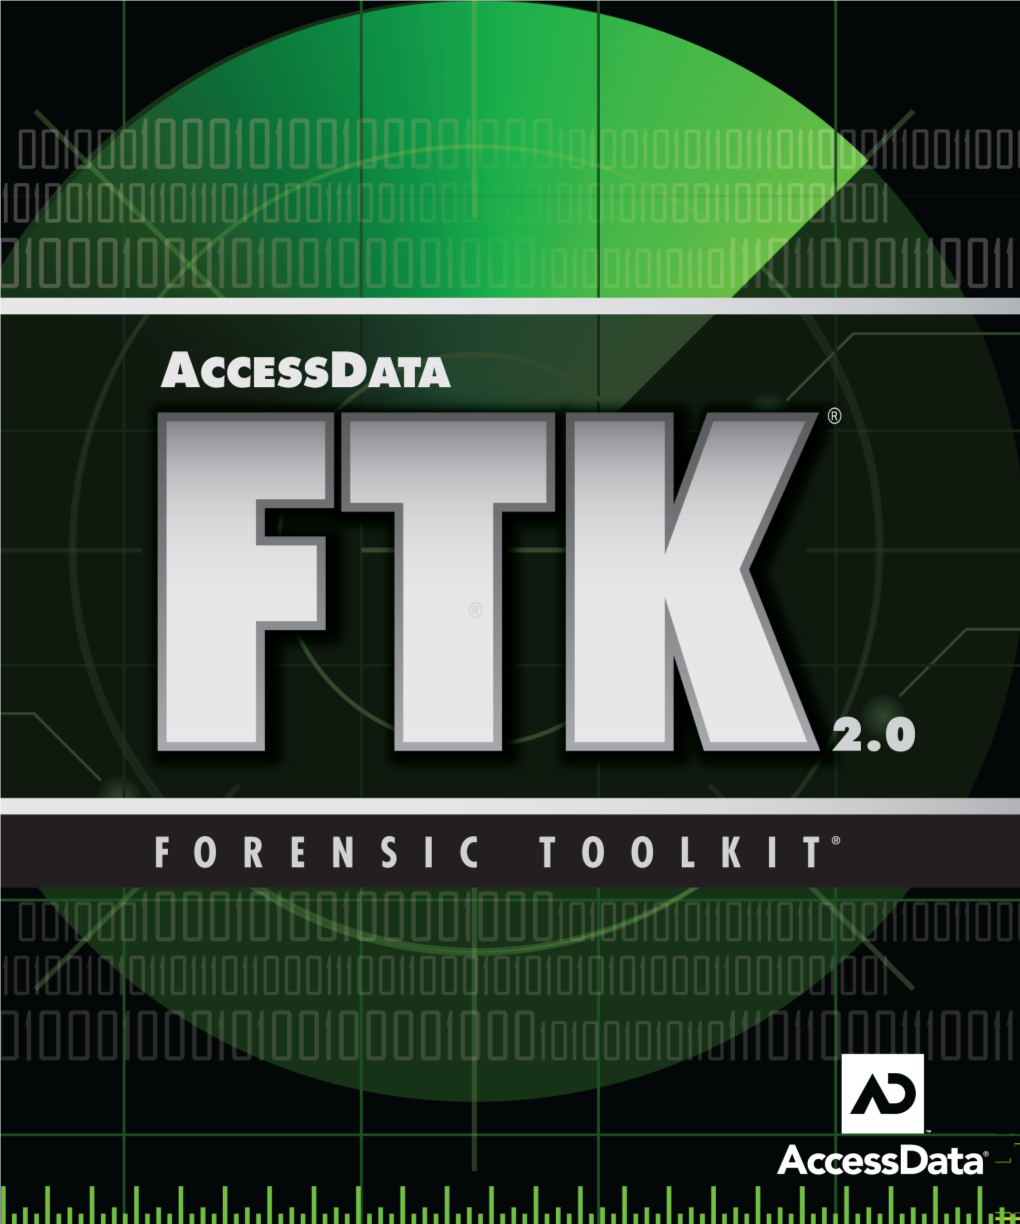 Role of Forensic Toolkit